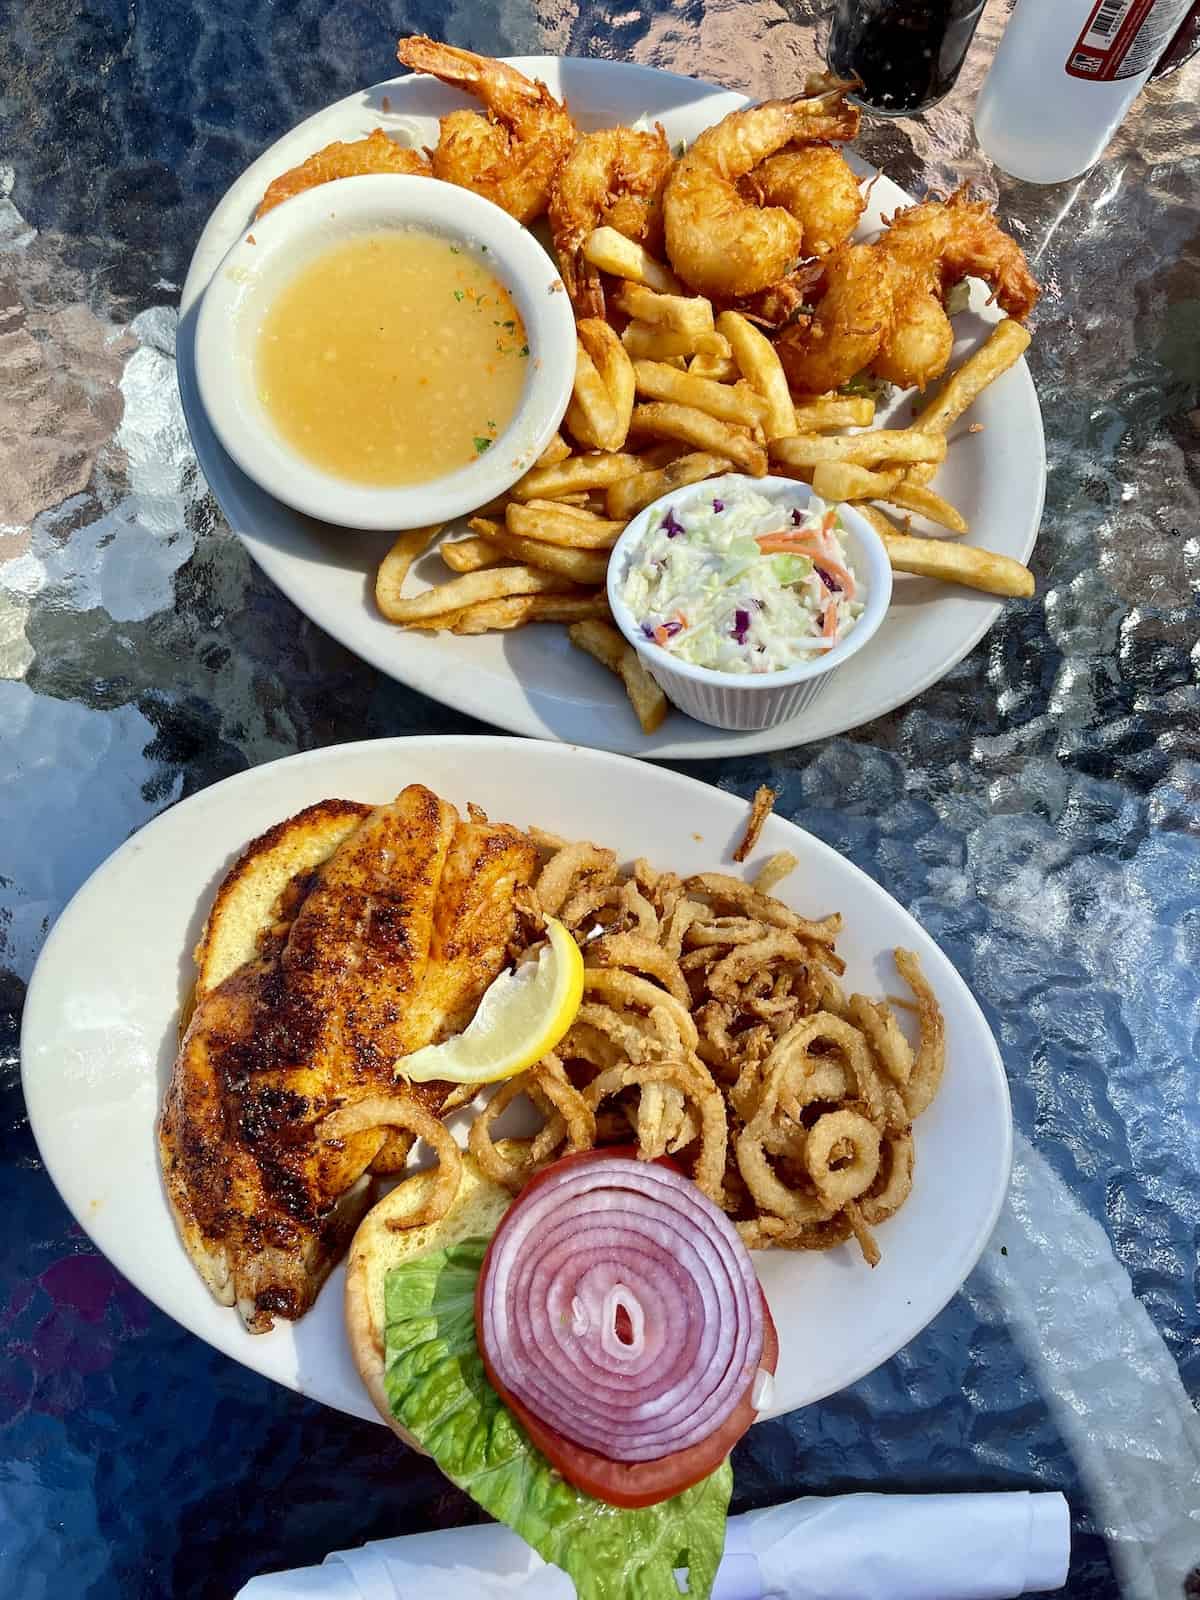 Platter of fried shrimp with French fries and cole slaw and platter of fish sandwich with onion straws.